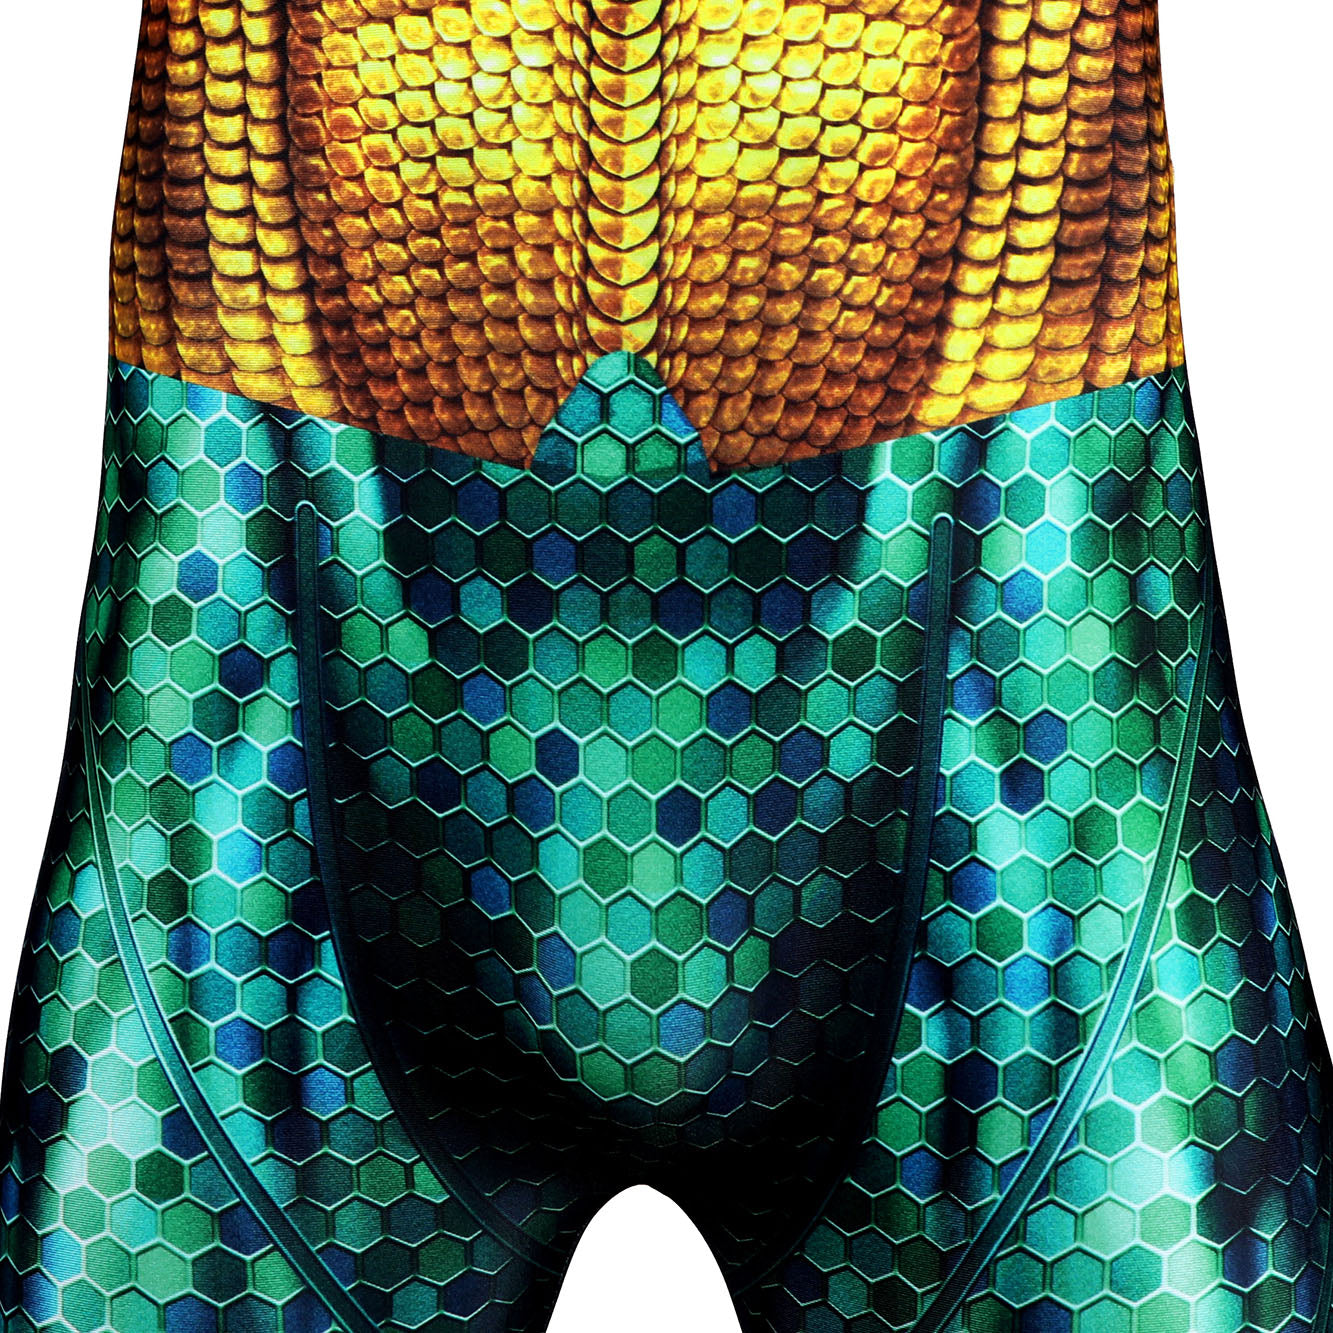 Aquaman 2 The Lost Kingdom Arthur Curry Male Jumpsuit Cosplay Costumes